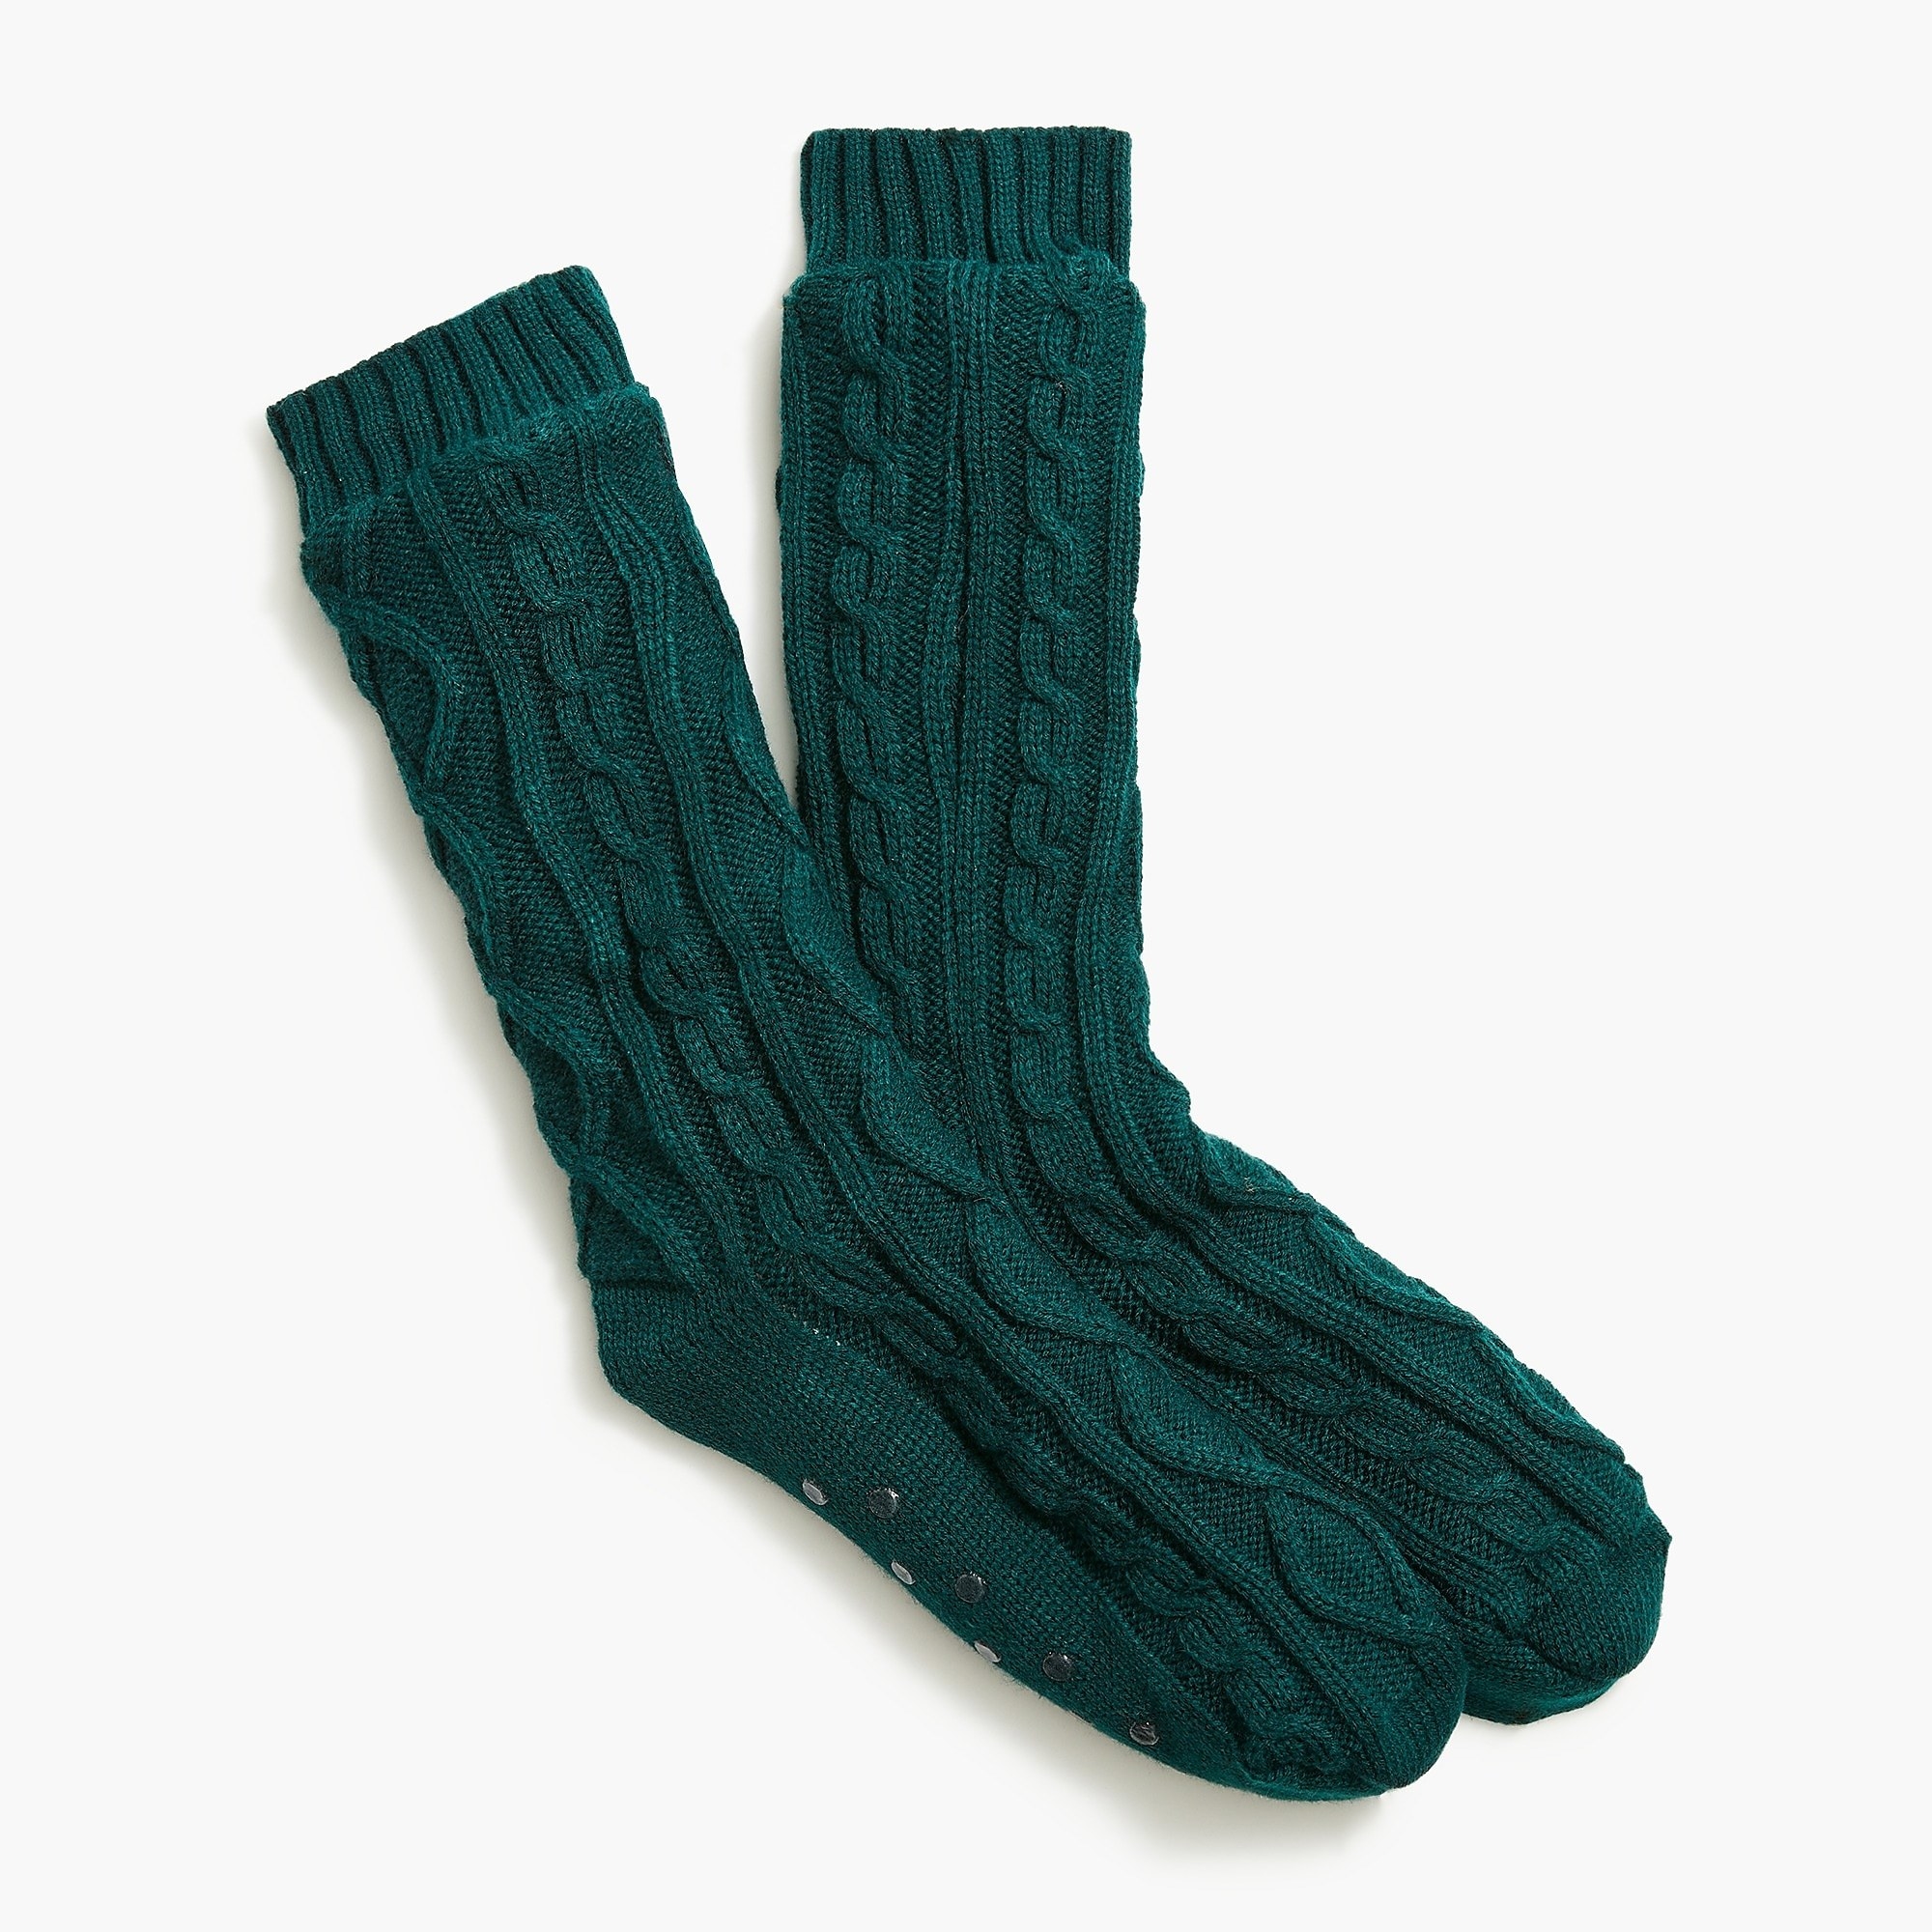 A pair of green cable knit trouser socks